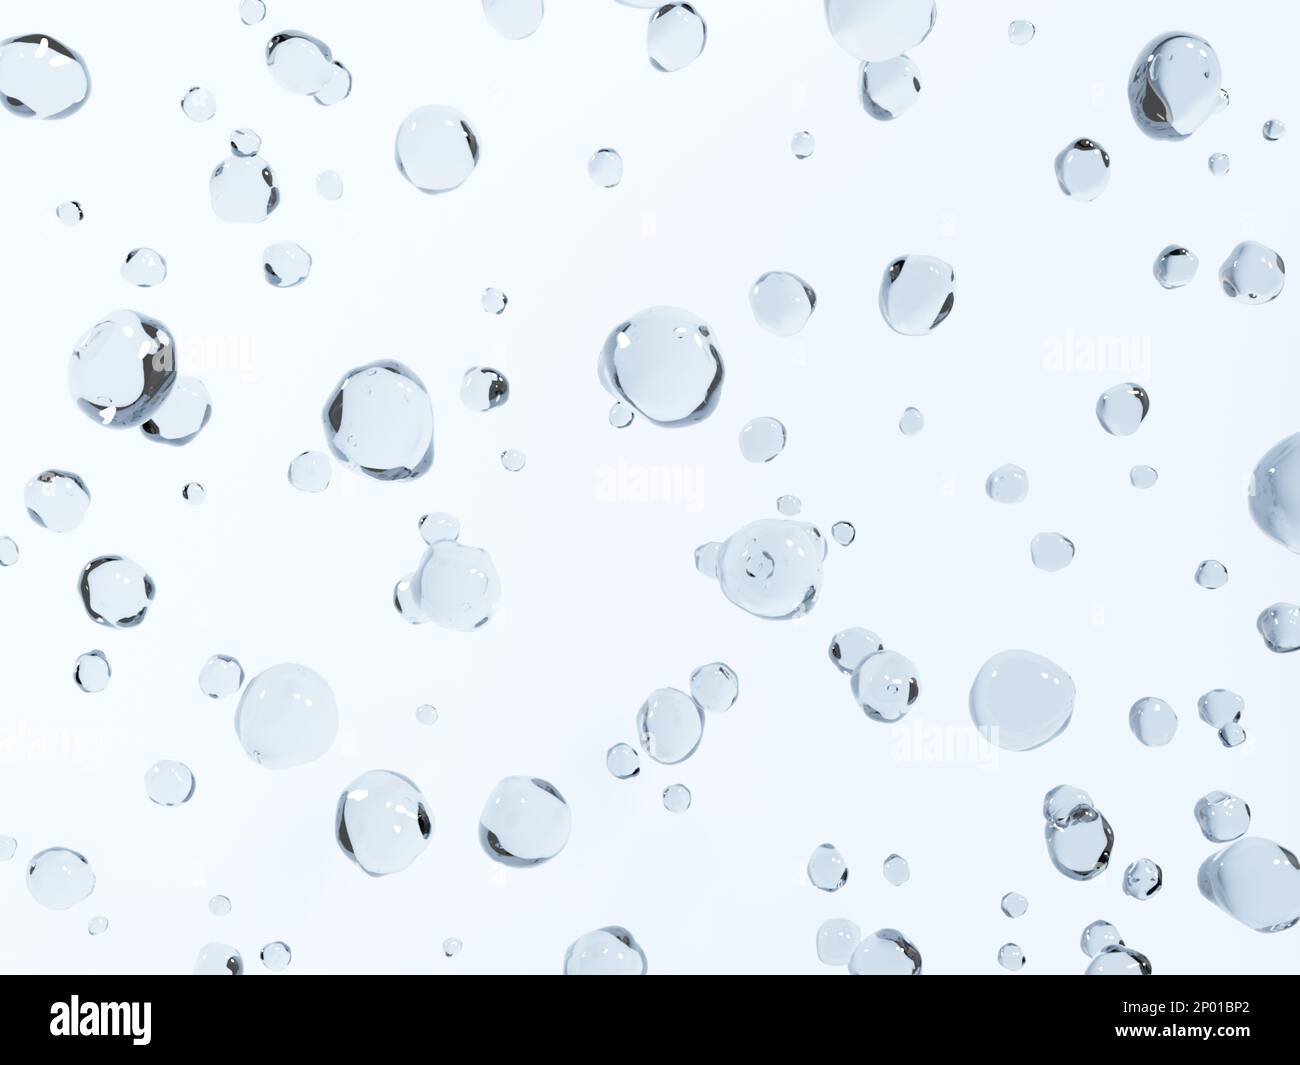 3D Rendering Studio Shot Light Blue Waterdrops Background for Beauty, Skin Care, food and Beverage Advertising Product Display. Stock Photo